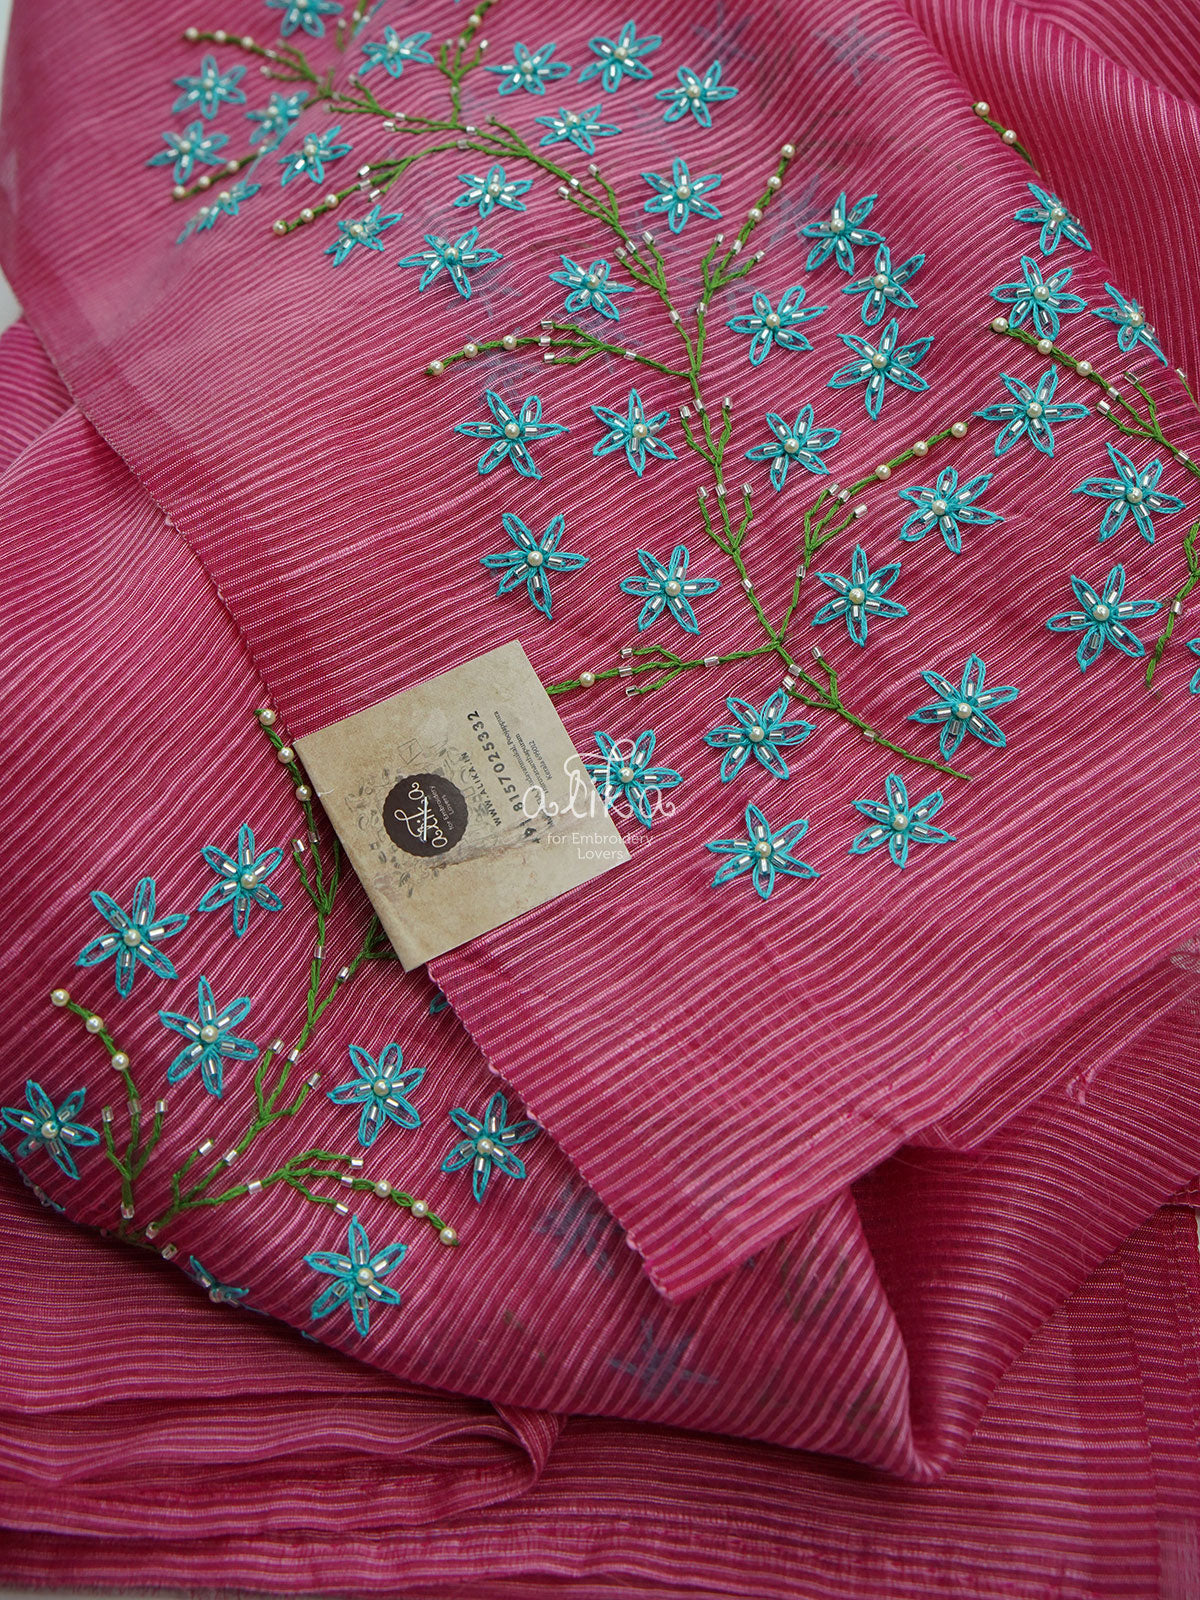 PINK STRIPED KOTA SAREE WITH LAZY DAISY  EMBROIDERY